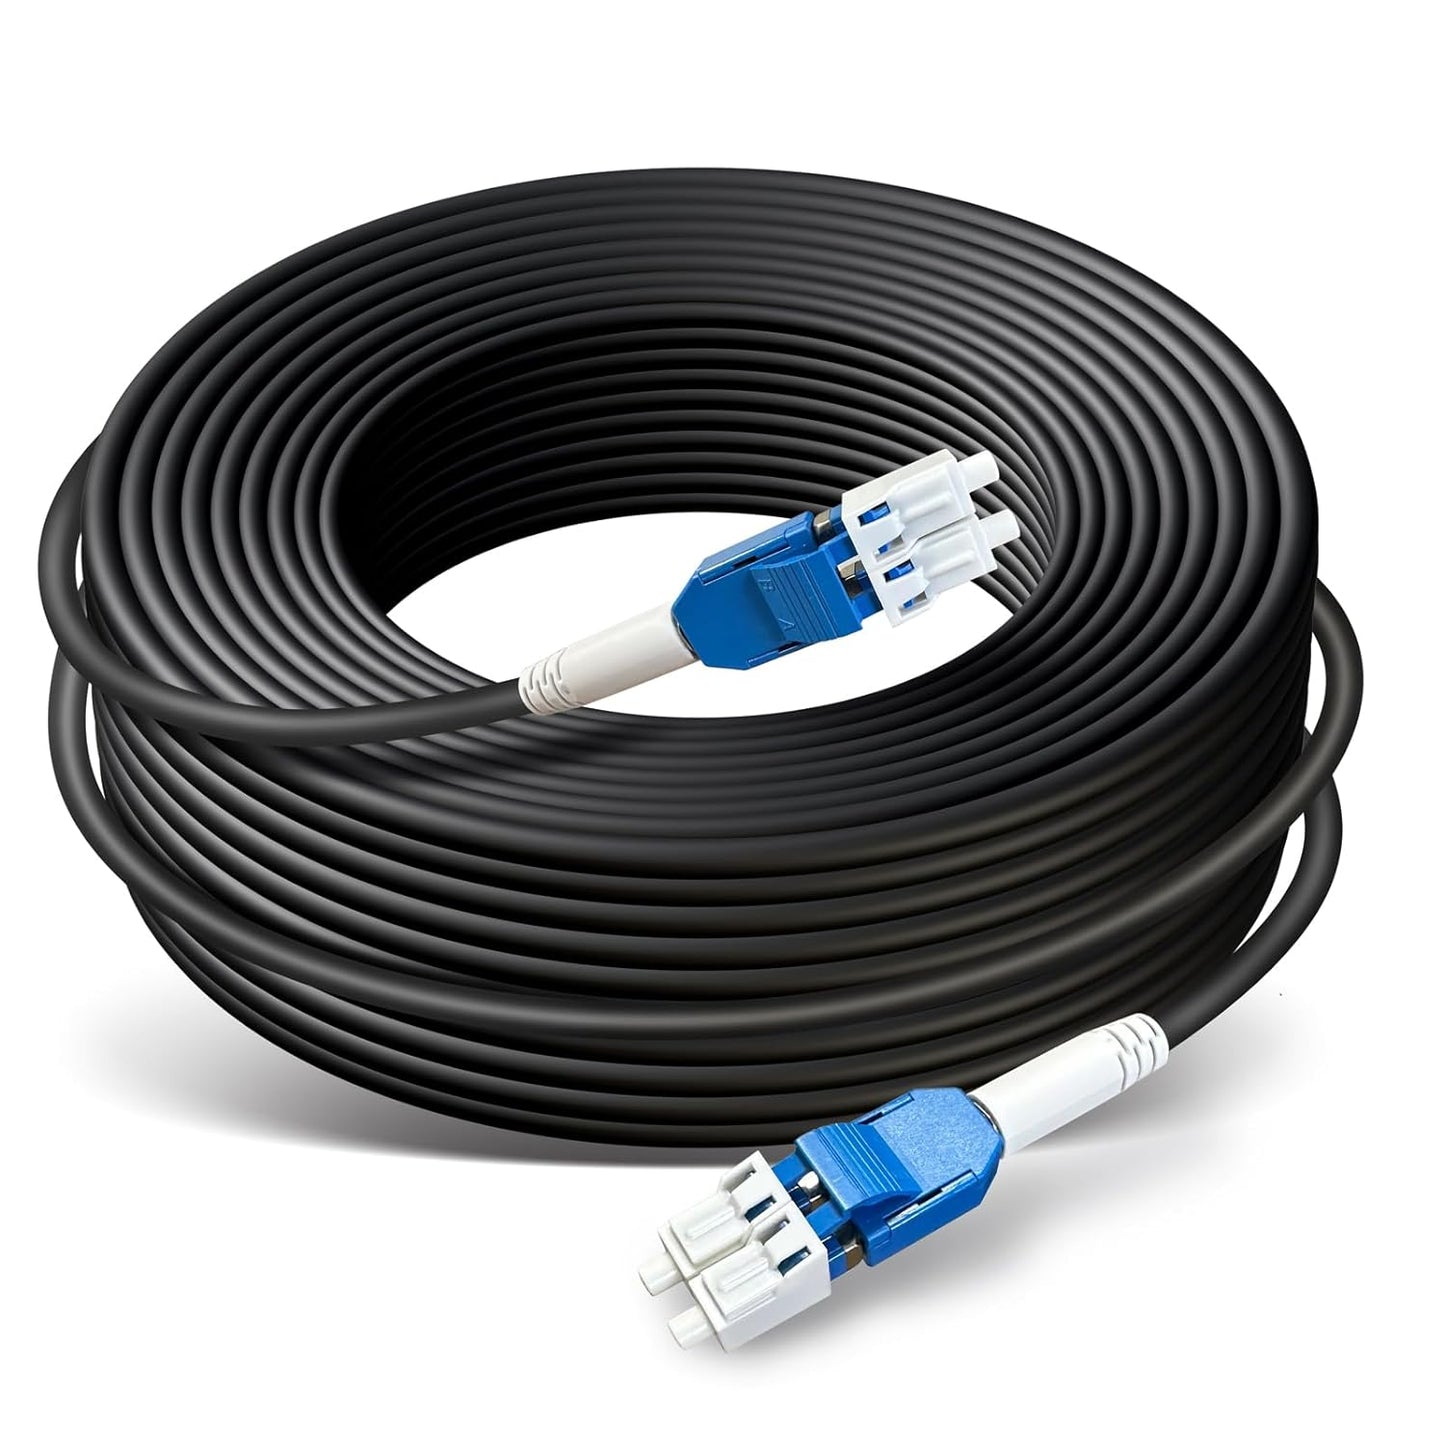 RiteAV - 500ft/150m OD-5mm Industrial TPU OS2 LC to LC Outdoor Armored Fiber Optic Cable, Duplex Single Mode Fiber Patch Cable, 9/125um Uniboot LC Fiber with Pulling Eye Kit Installed on one end